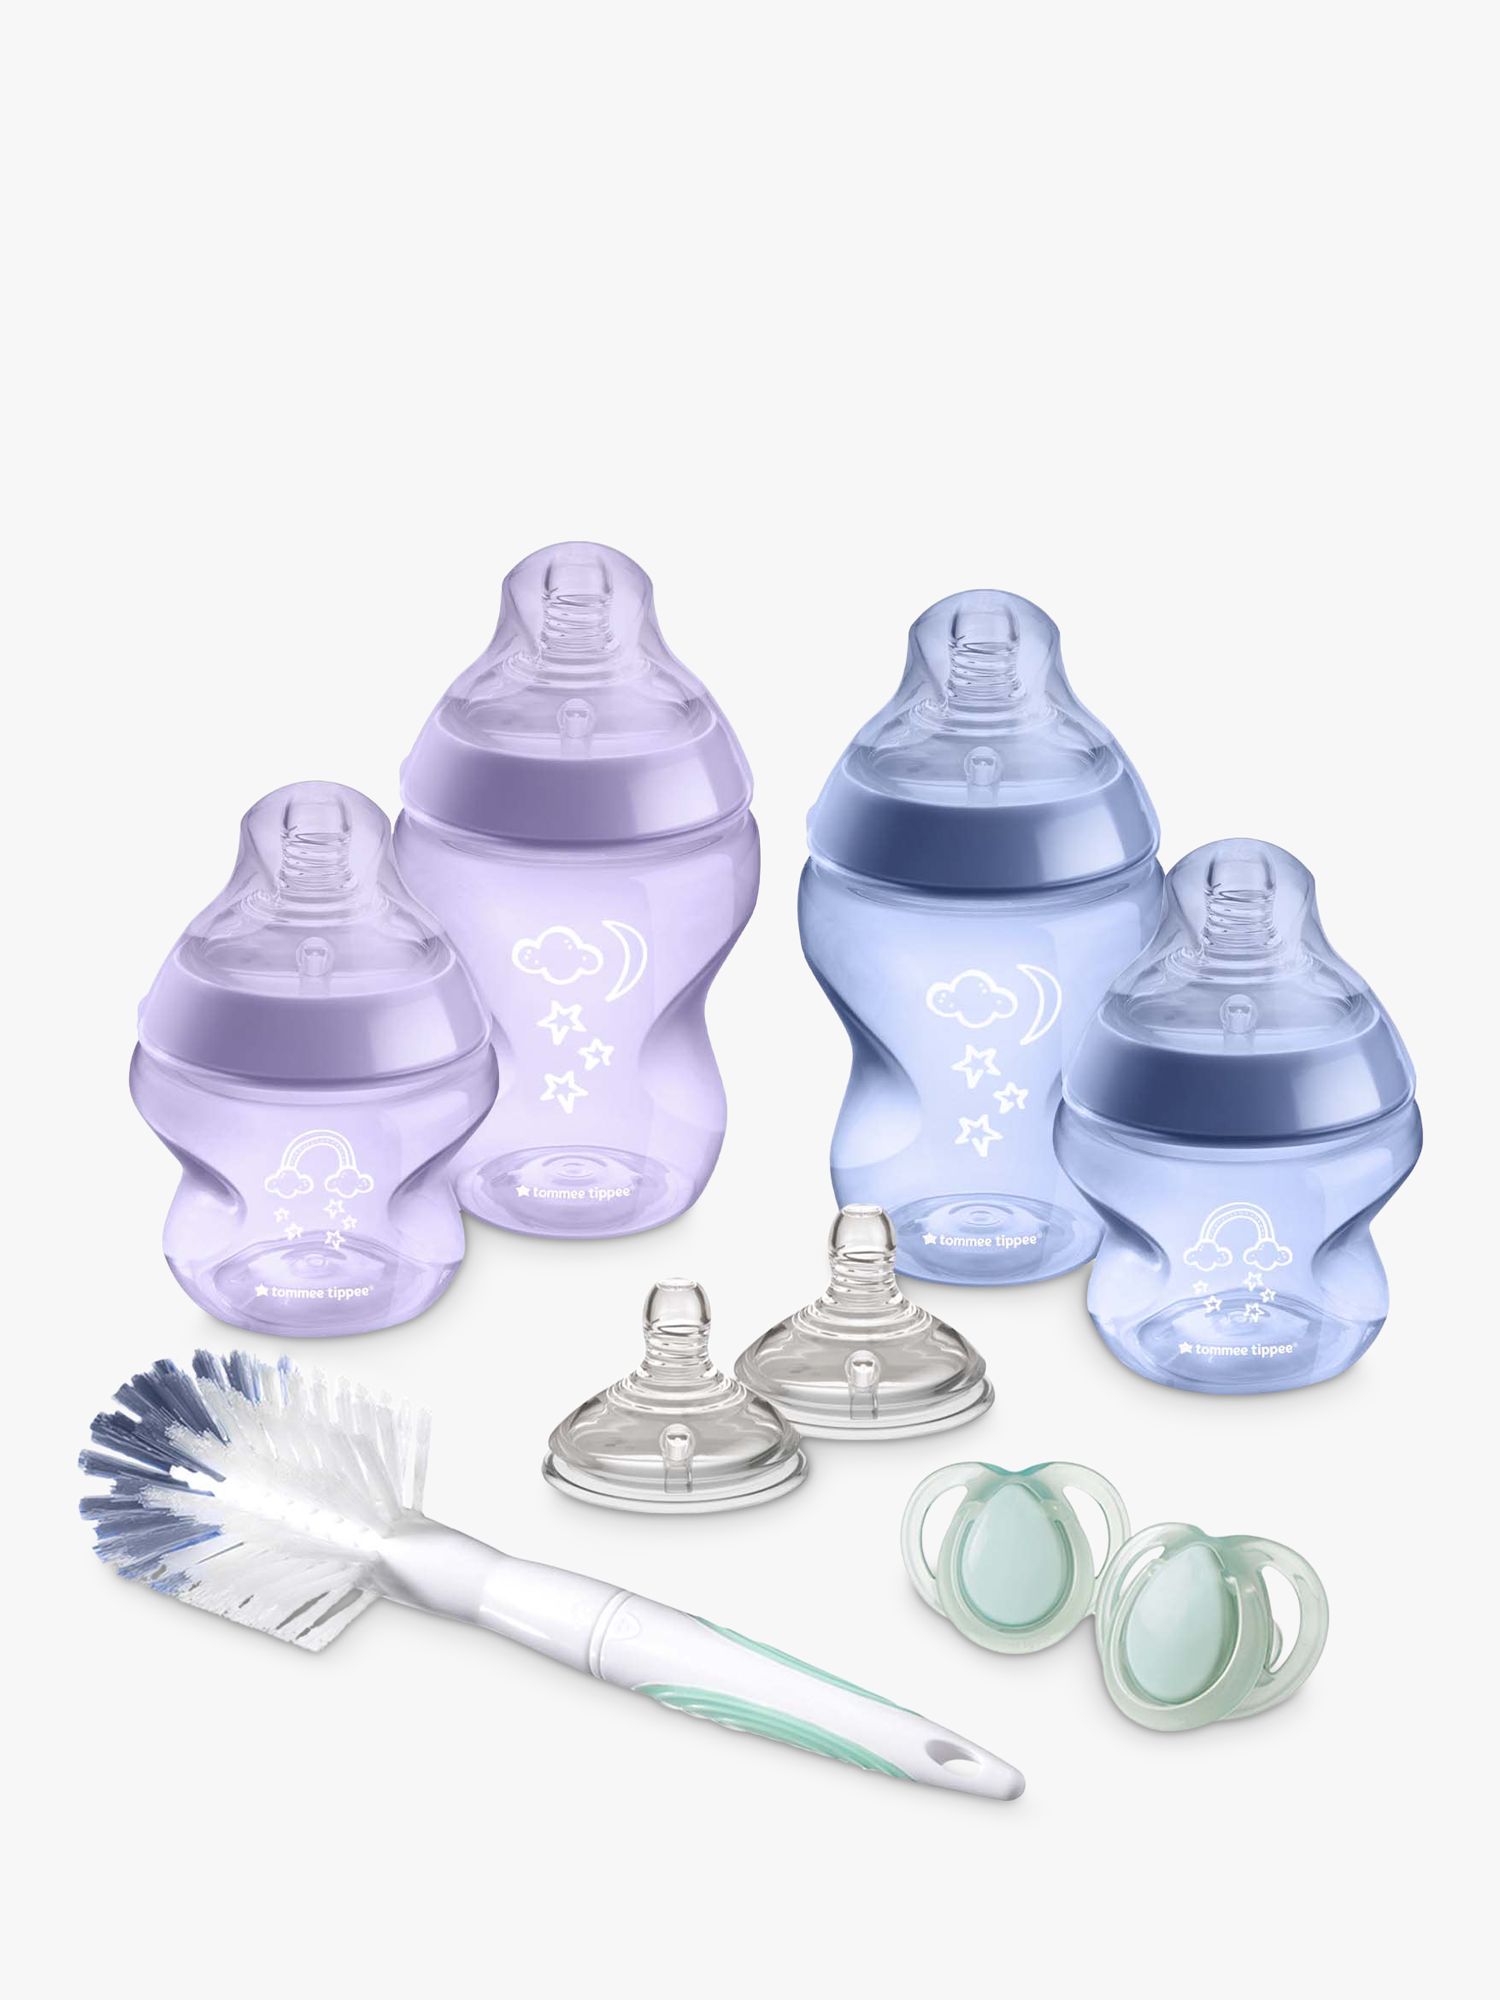 Tommee Tippee Closer to Nature Baby Bottle Newborn Starter Kit, Pink